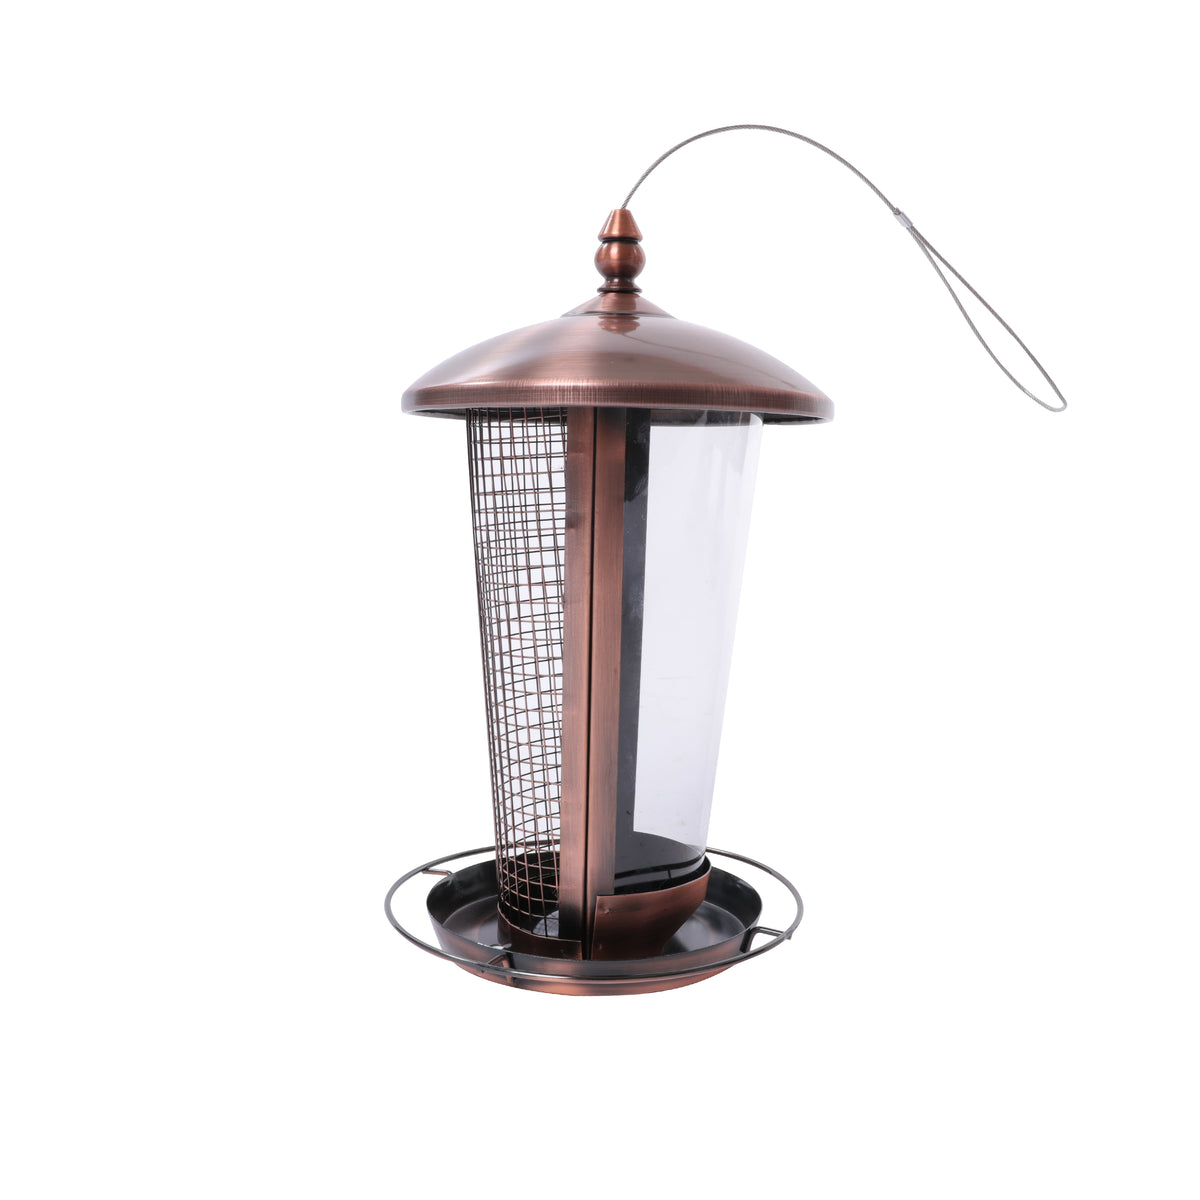 Bliss Outdoors 2-in-1 Hanging Bird Feeder with a twist-lock cover and a copper finish.